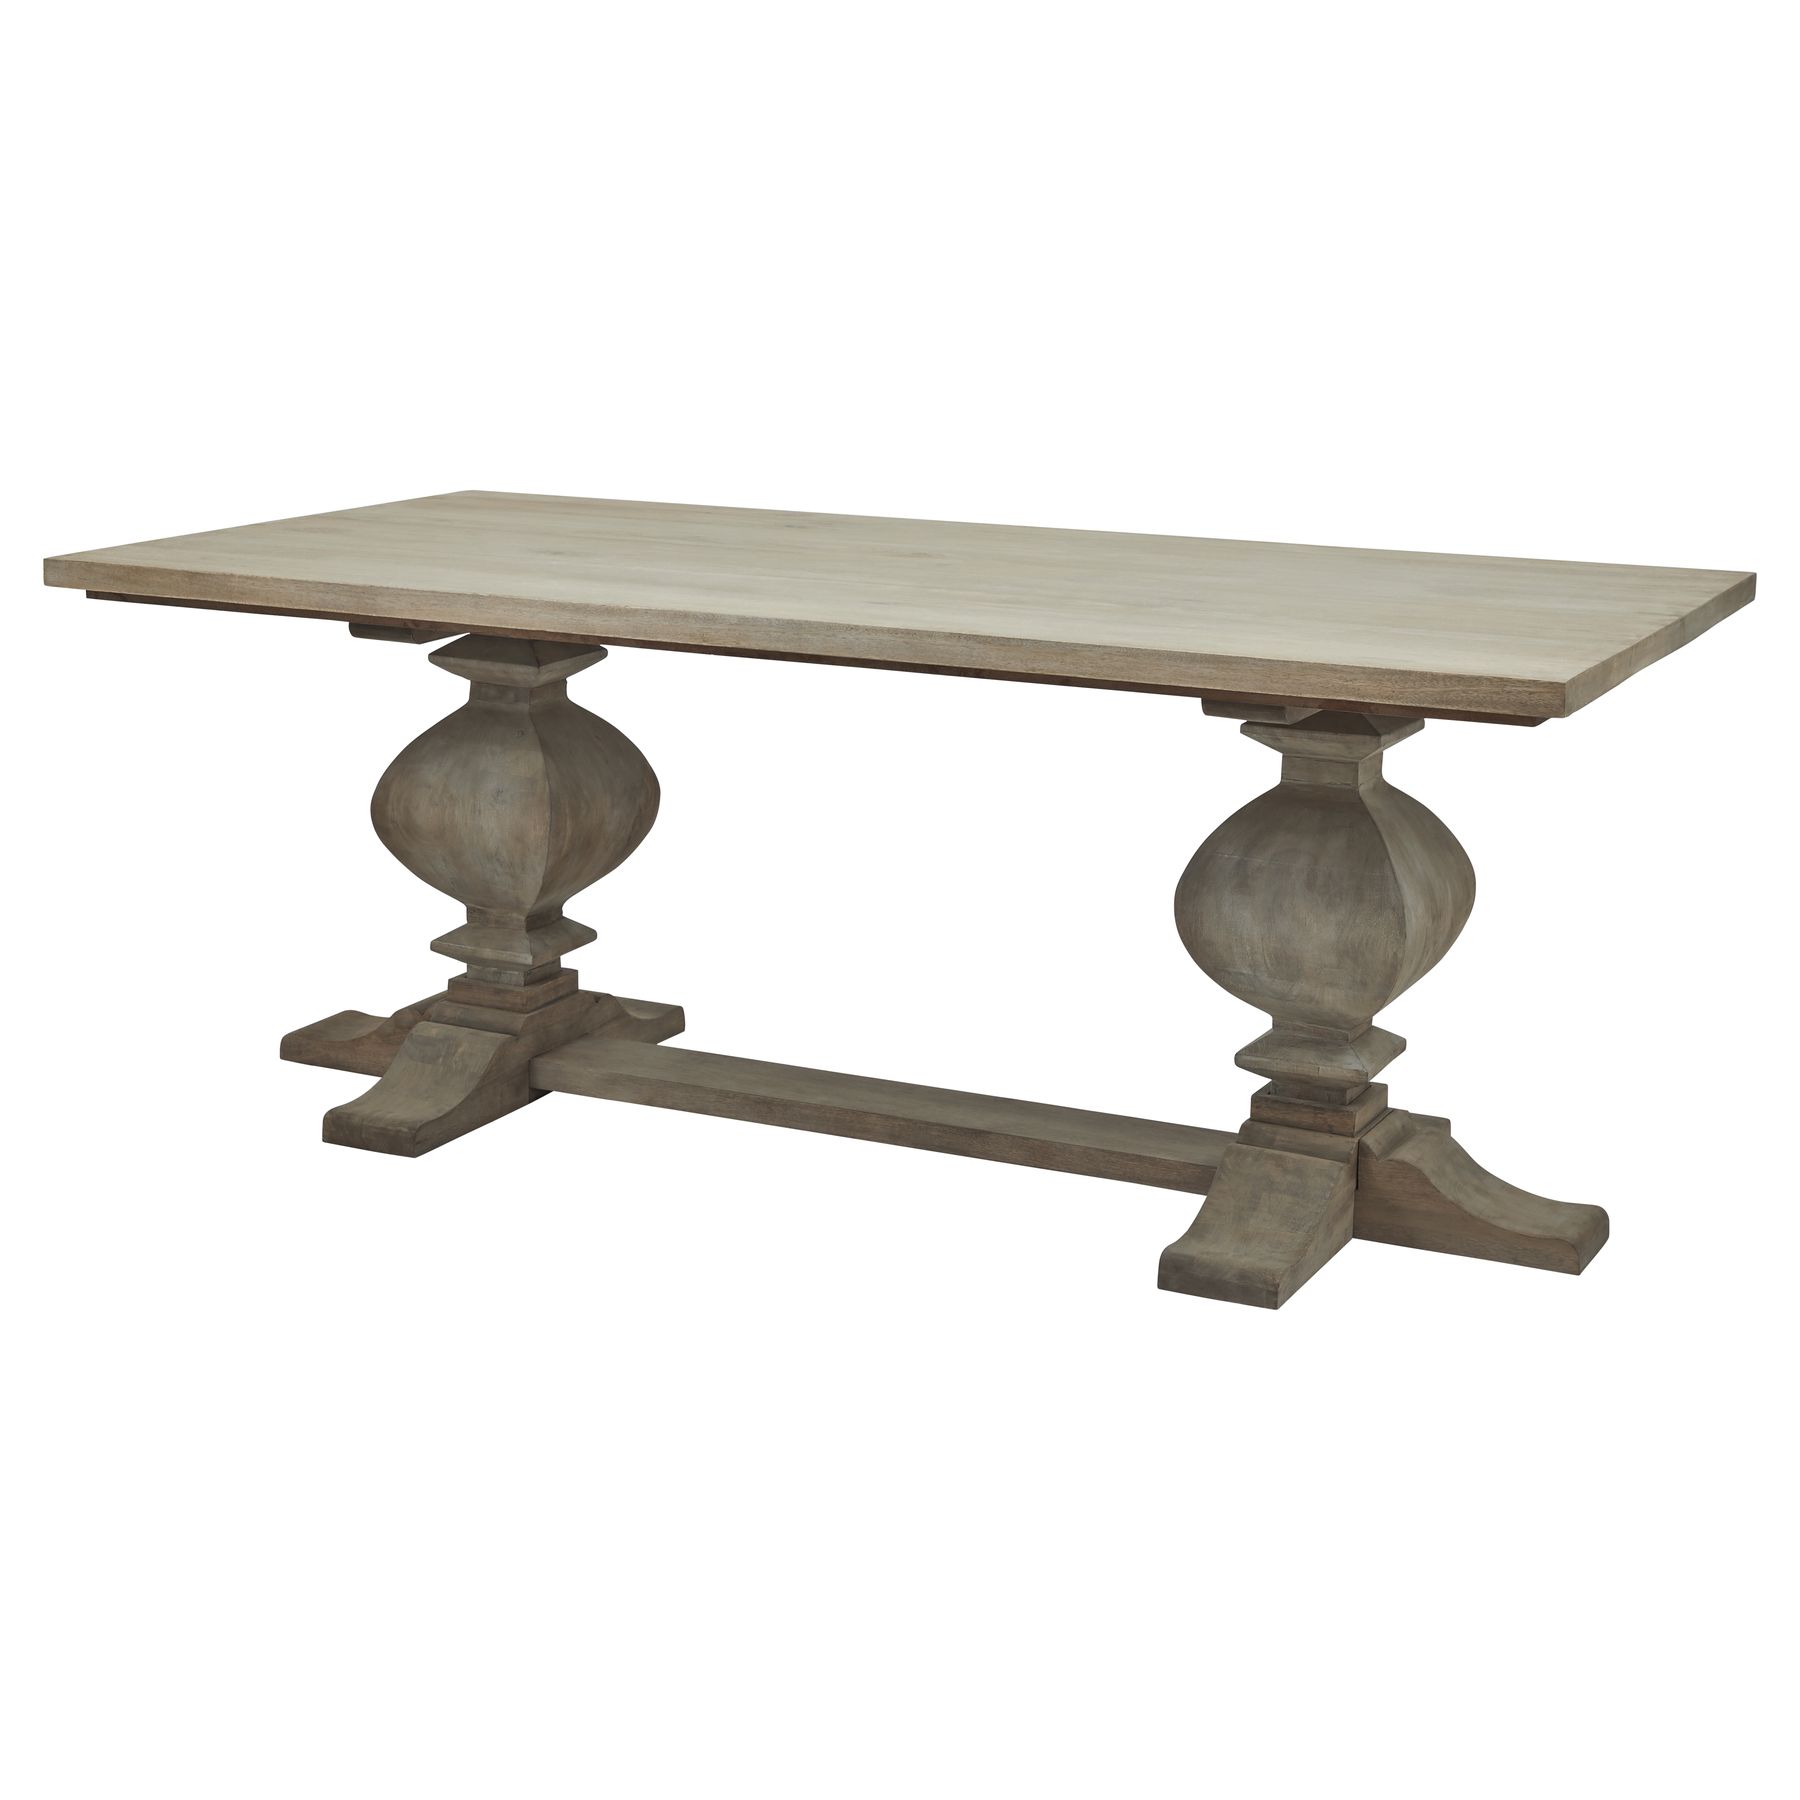 Copgrove Collection Large Dining Table - Image 1